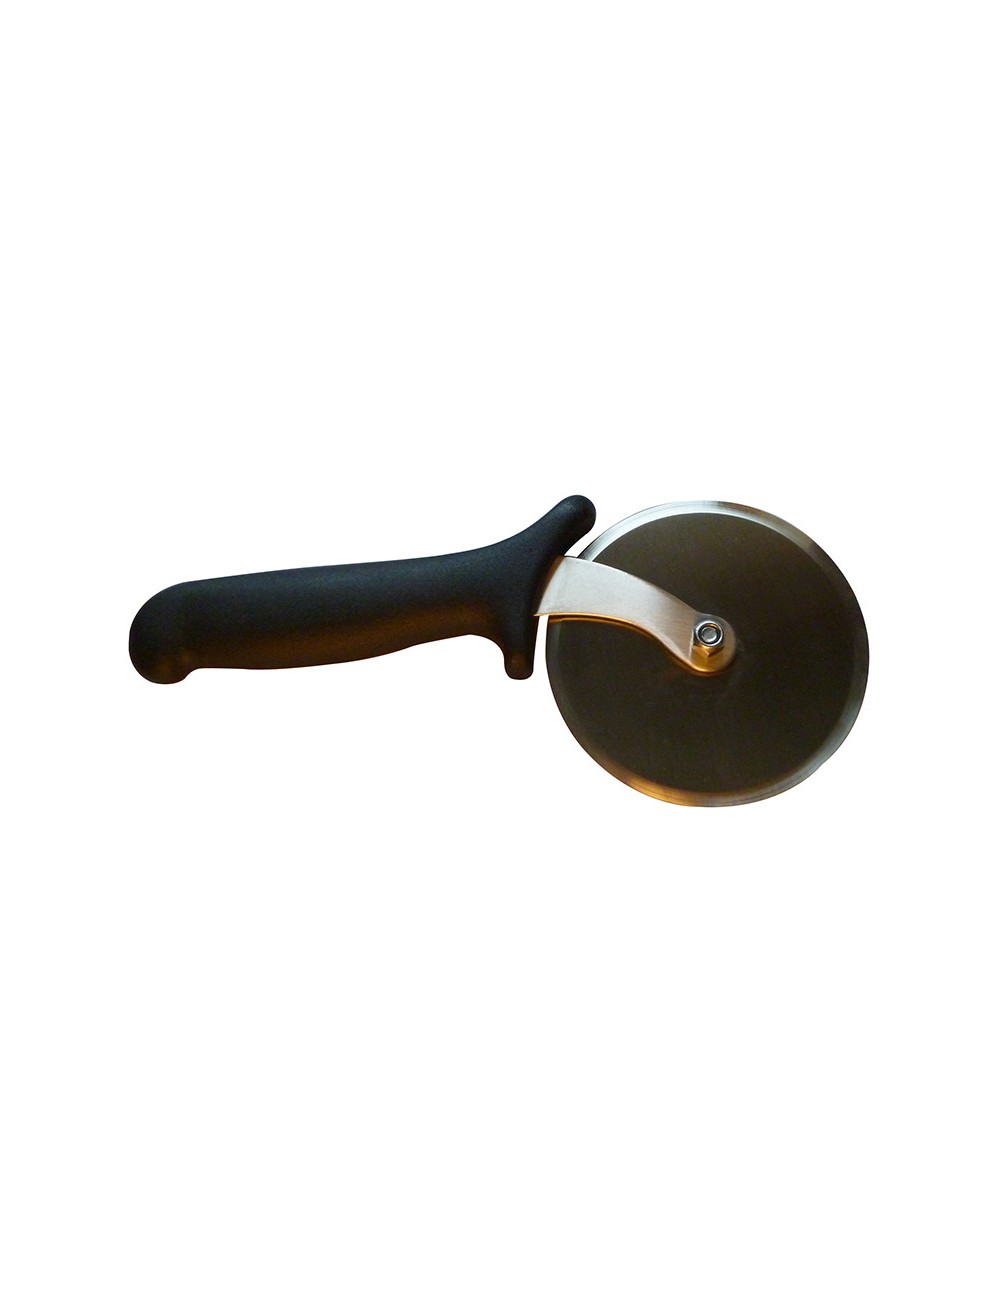 METAL PIZZA CUTTER - LARGE MODEL